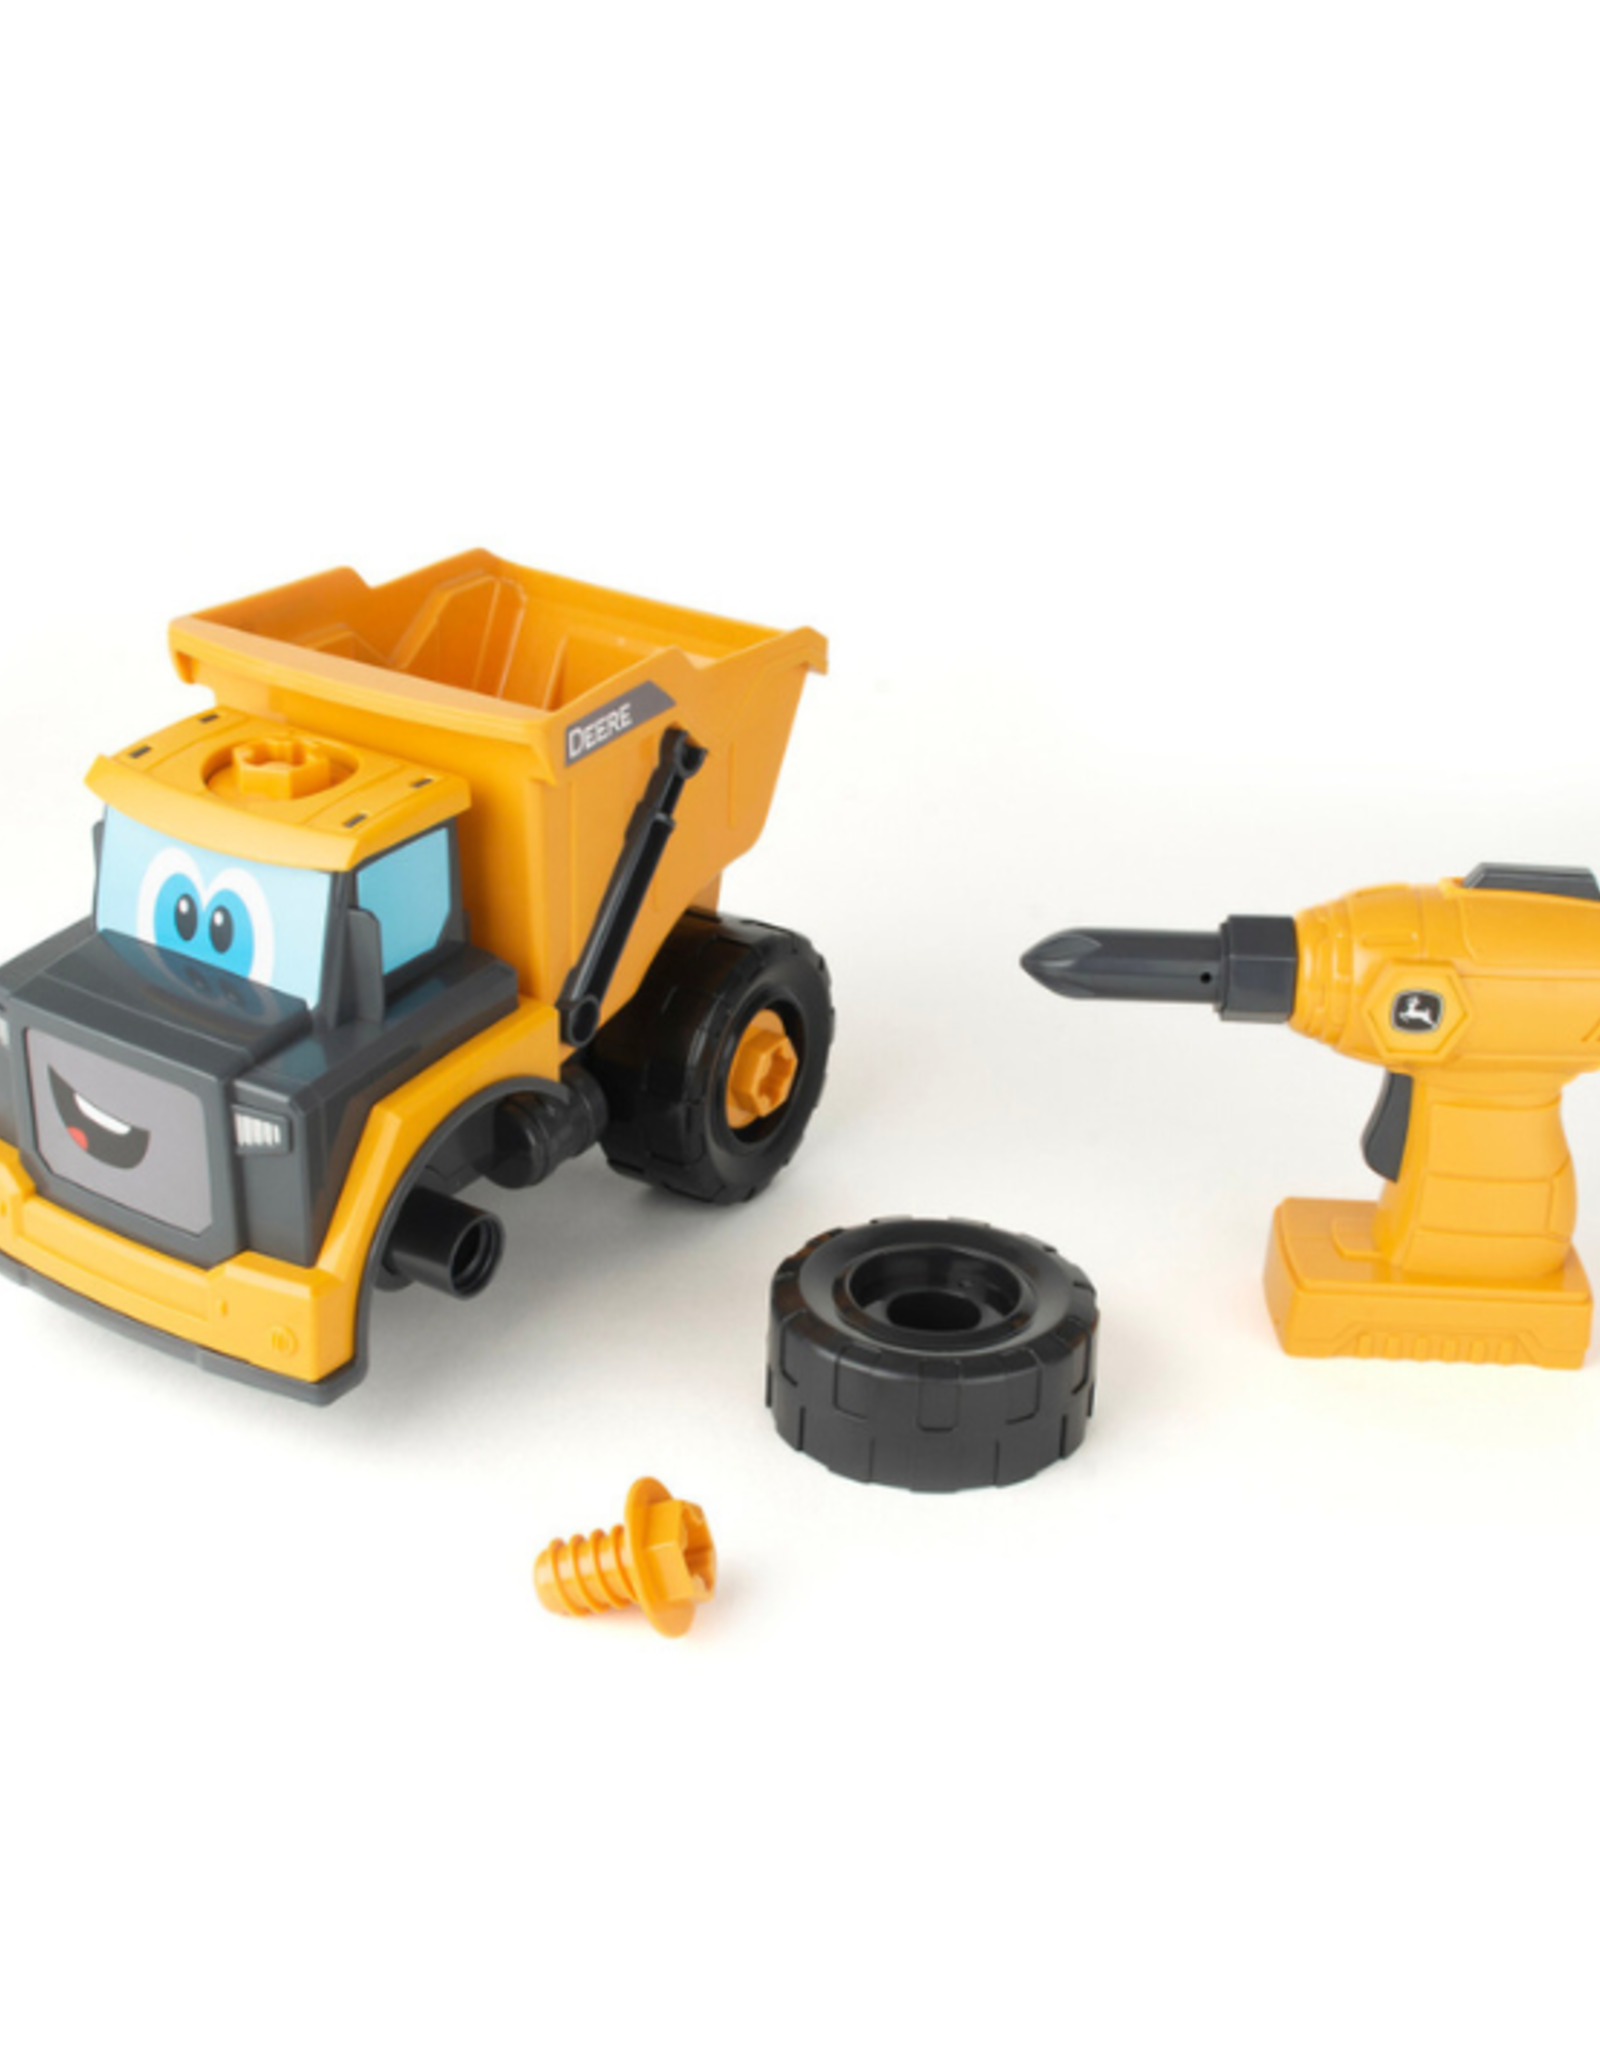 Tomy Tomy - John Deere Build-A-Buddy Yellow Dump Truck 2-in-1 Toy with Toy Drill